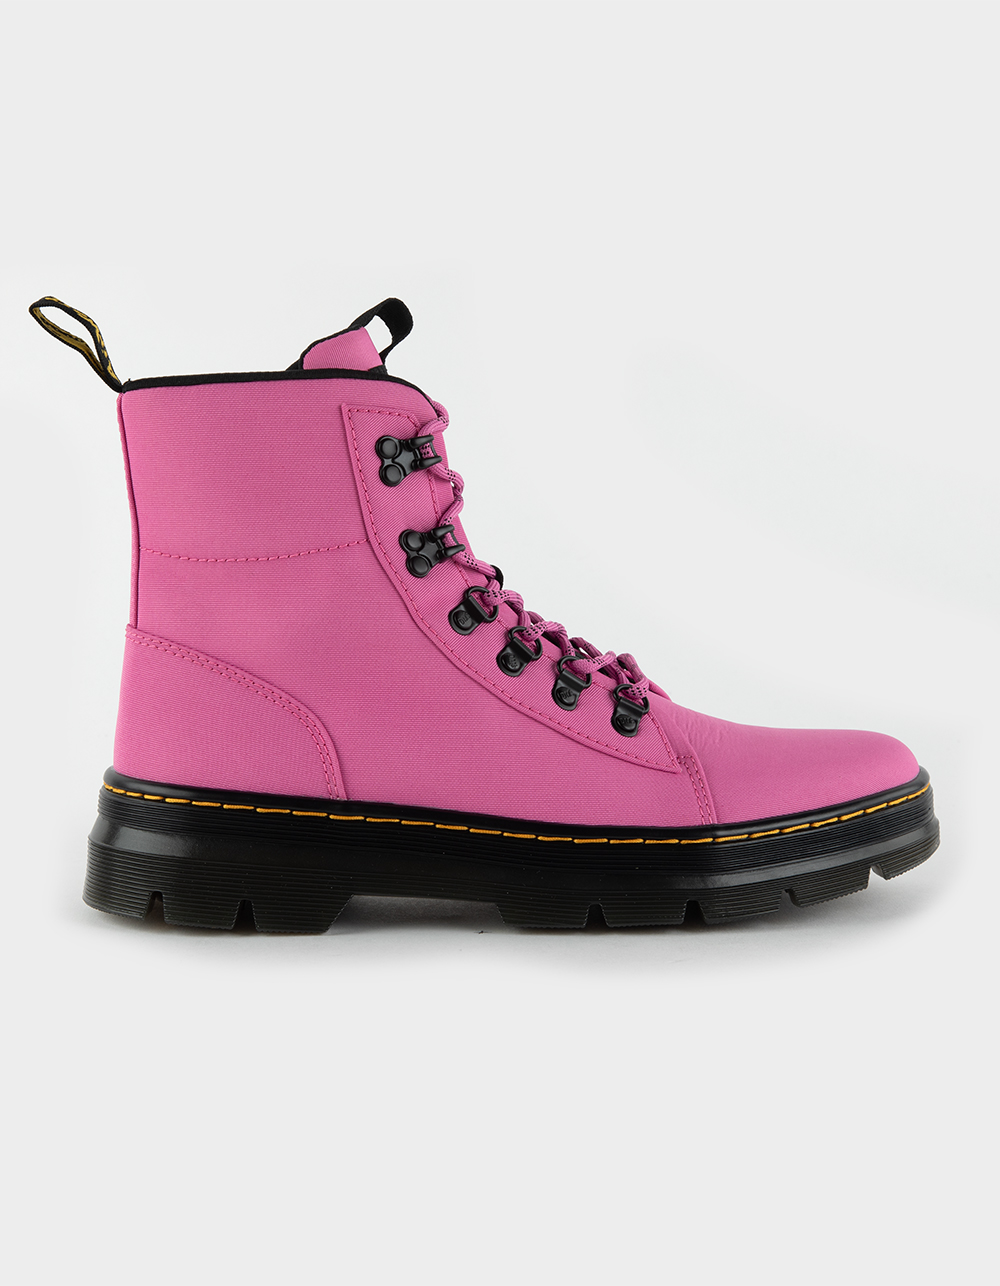 Dr. Martens Women's Combs Lace Up Boots